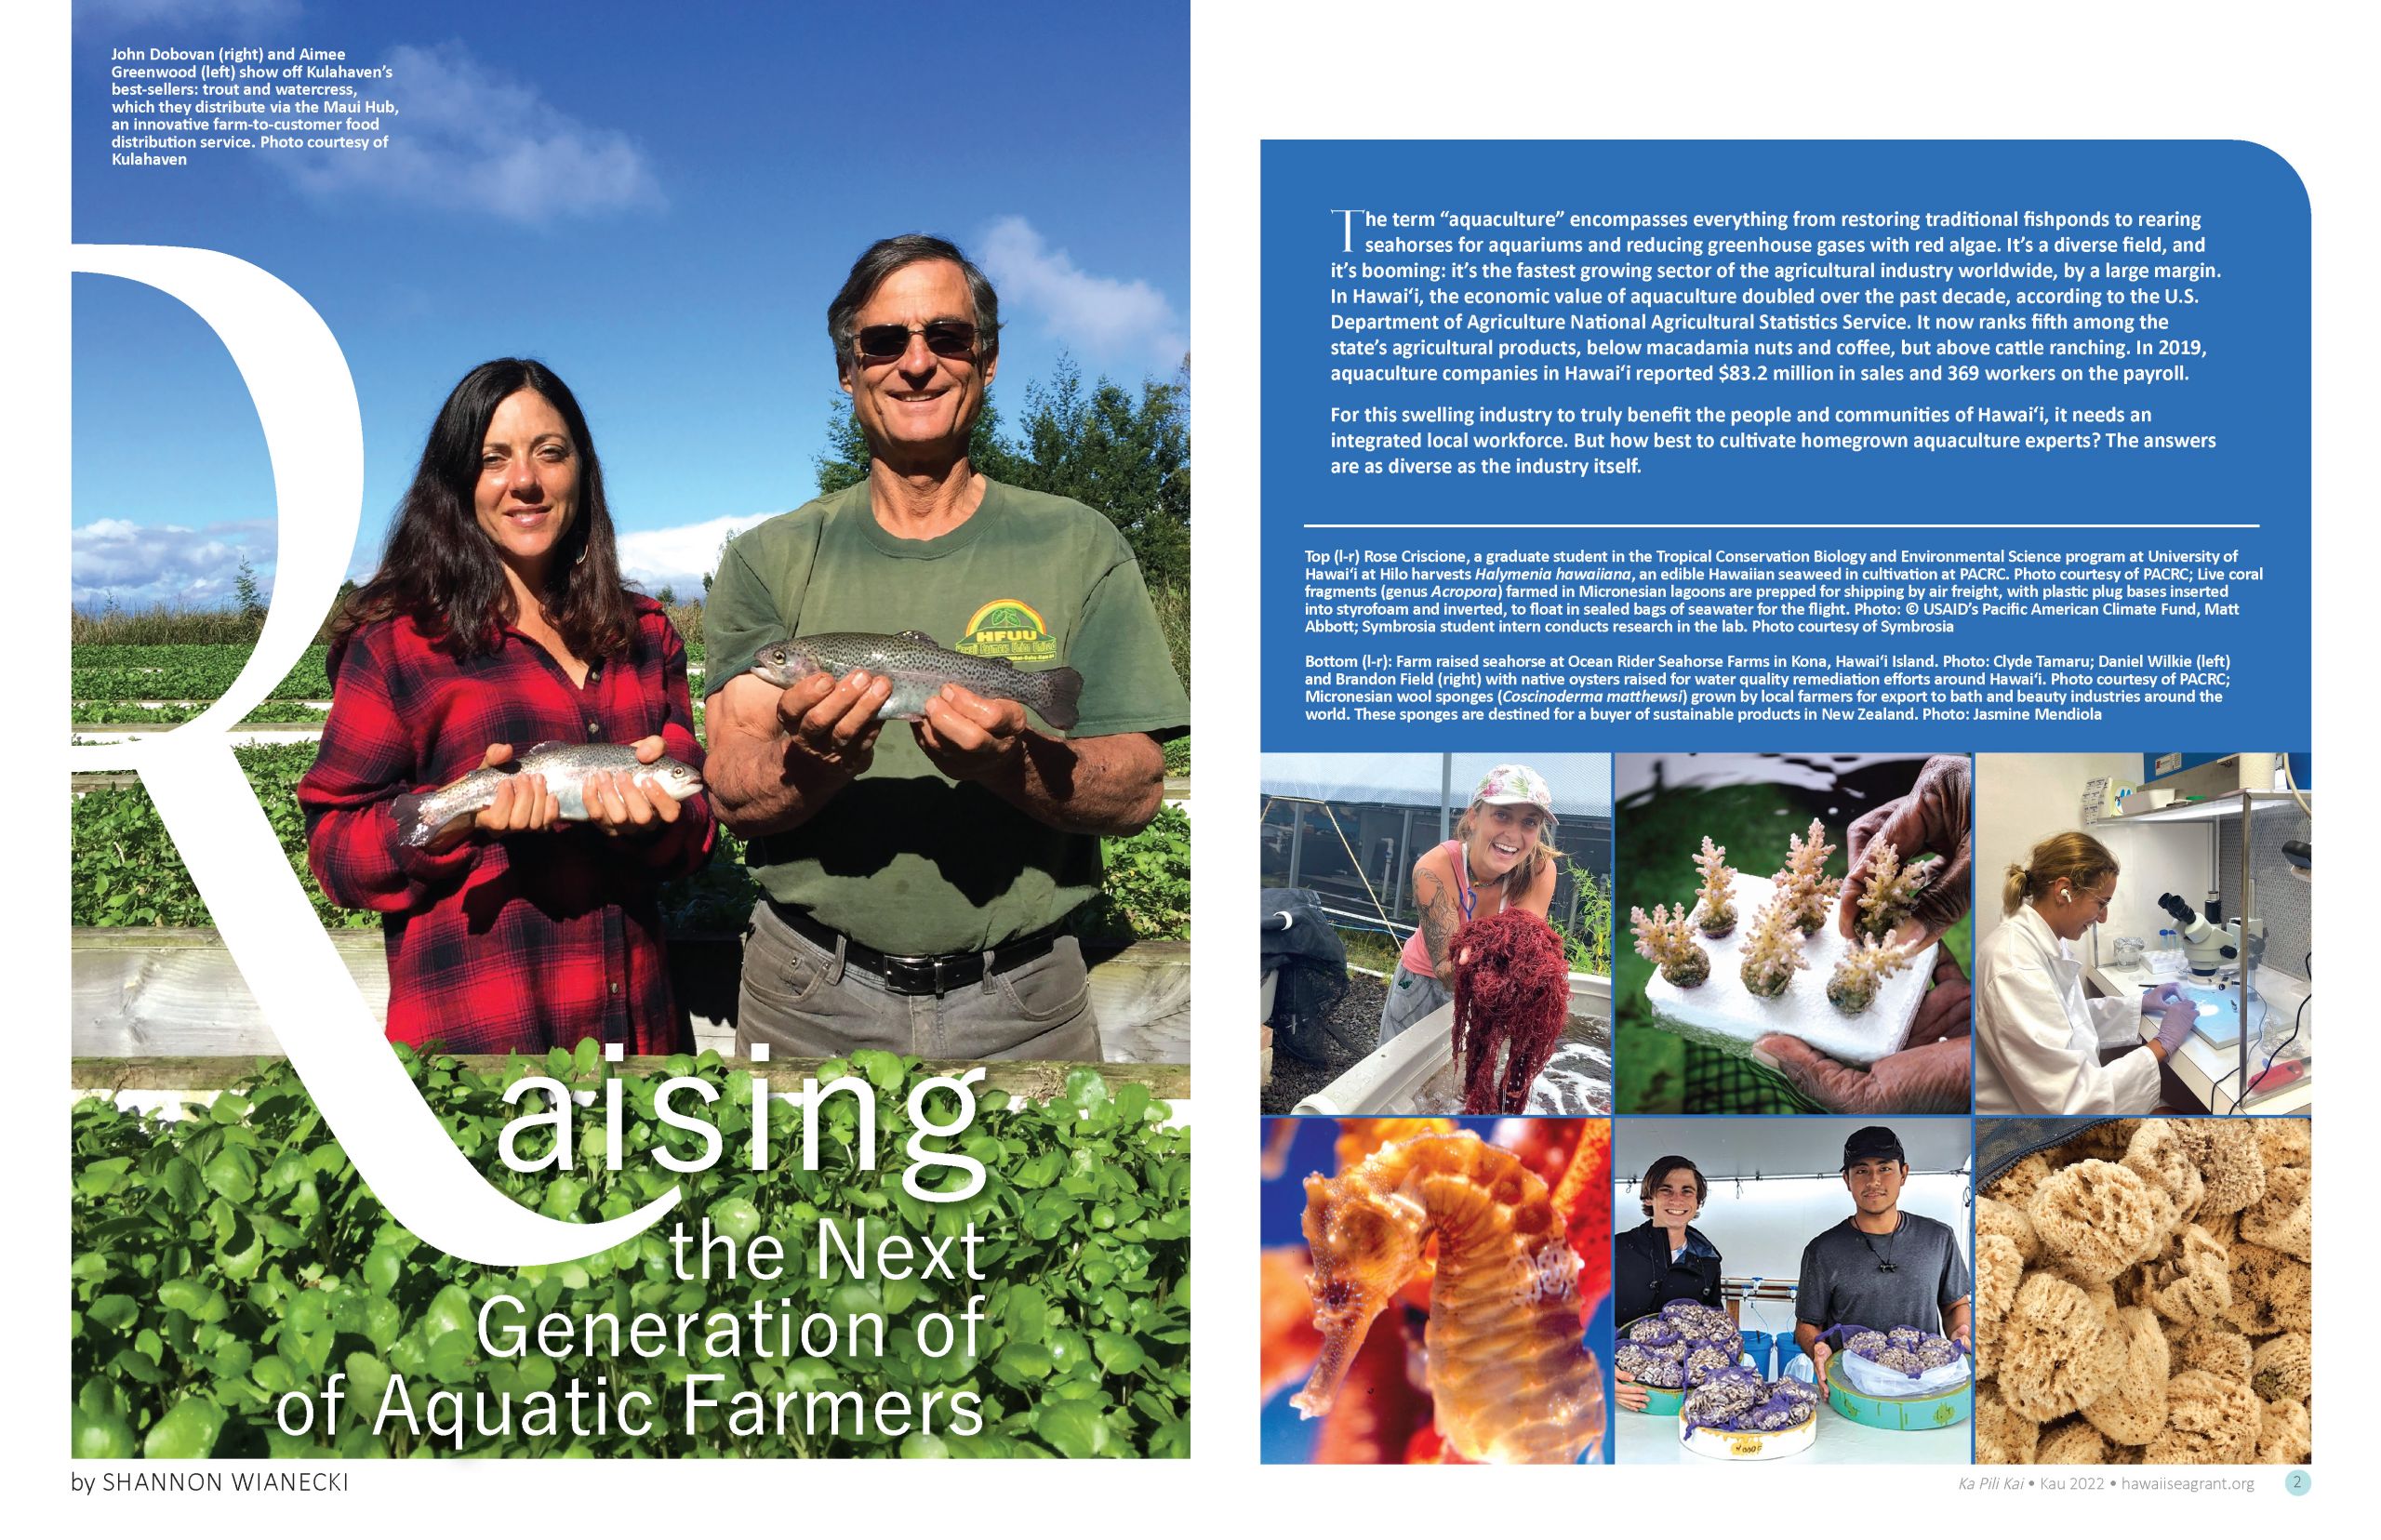 Article 'Raising the next generation of aquatic farmers' by Shannon Wianecki